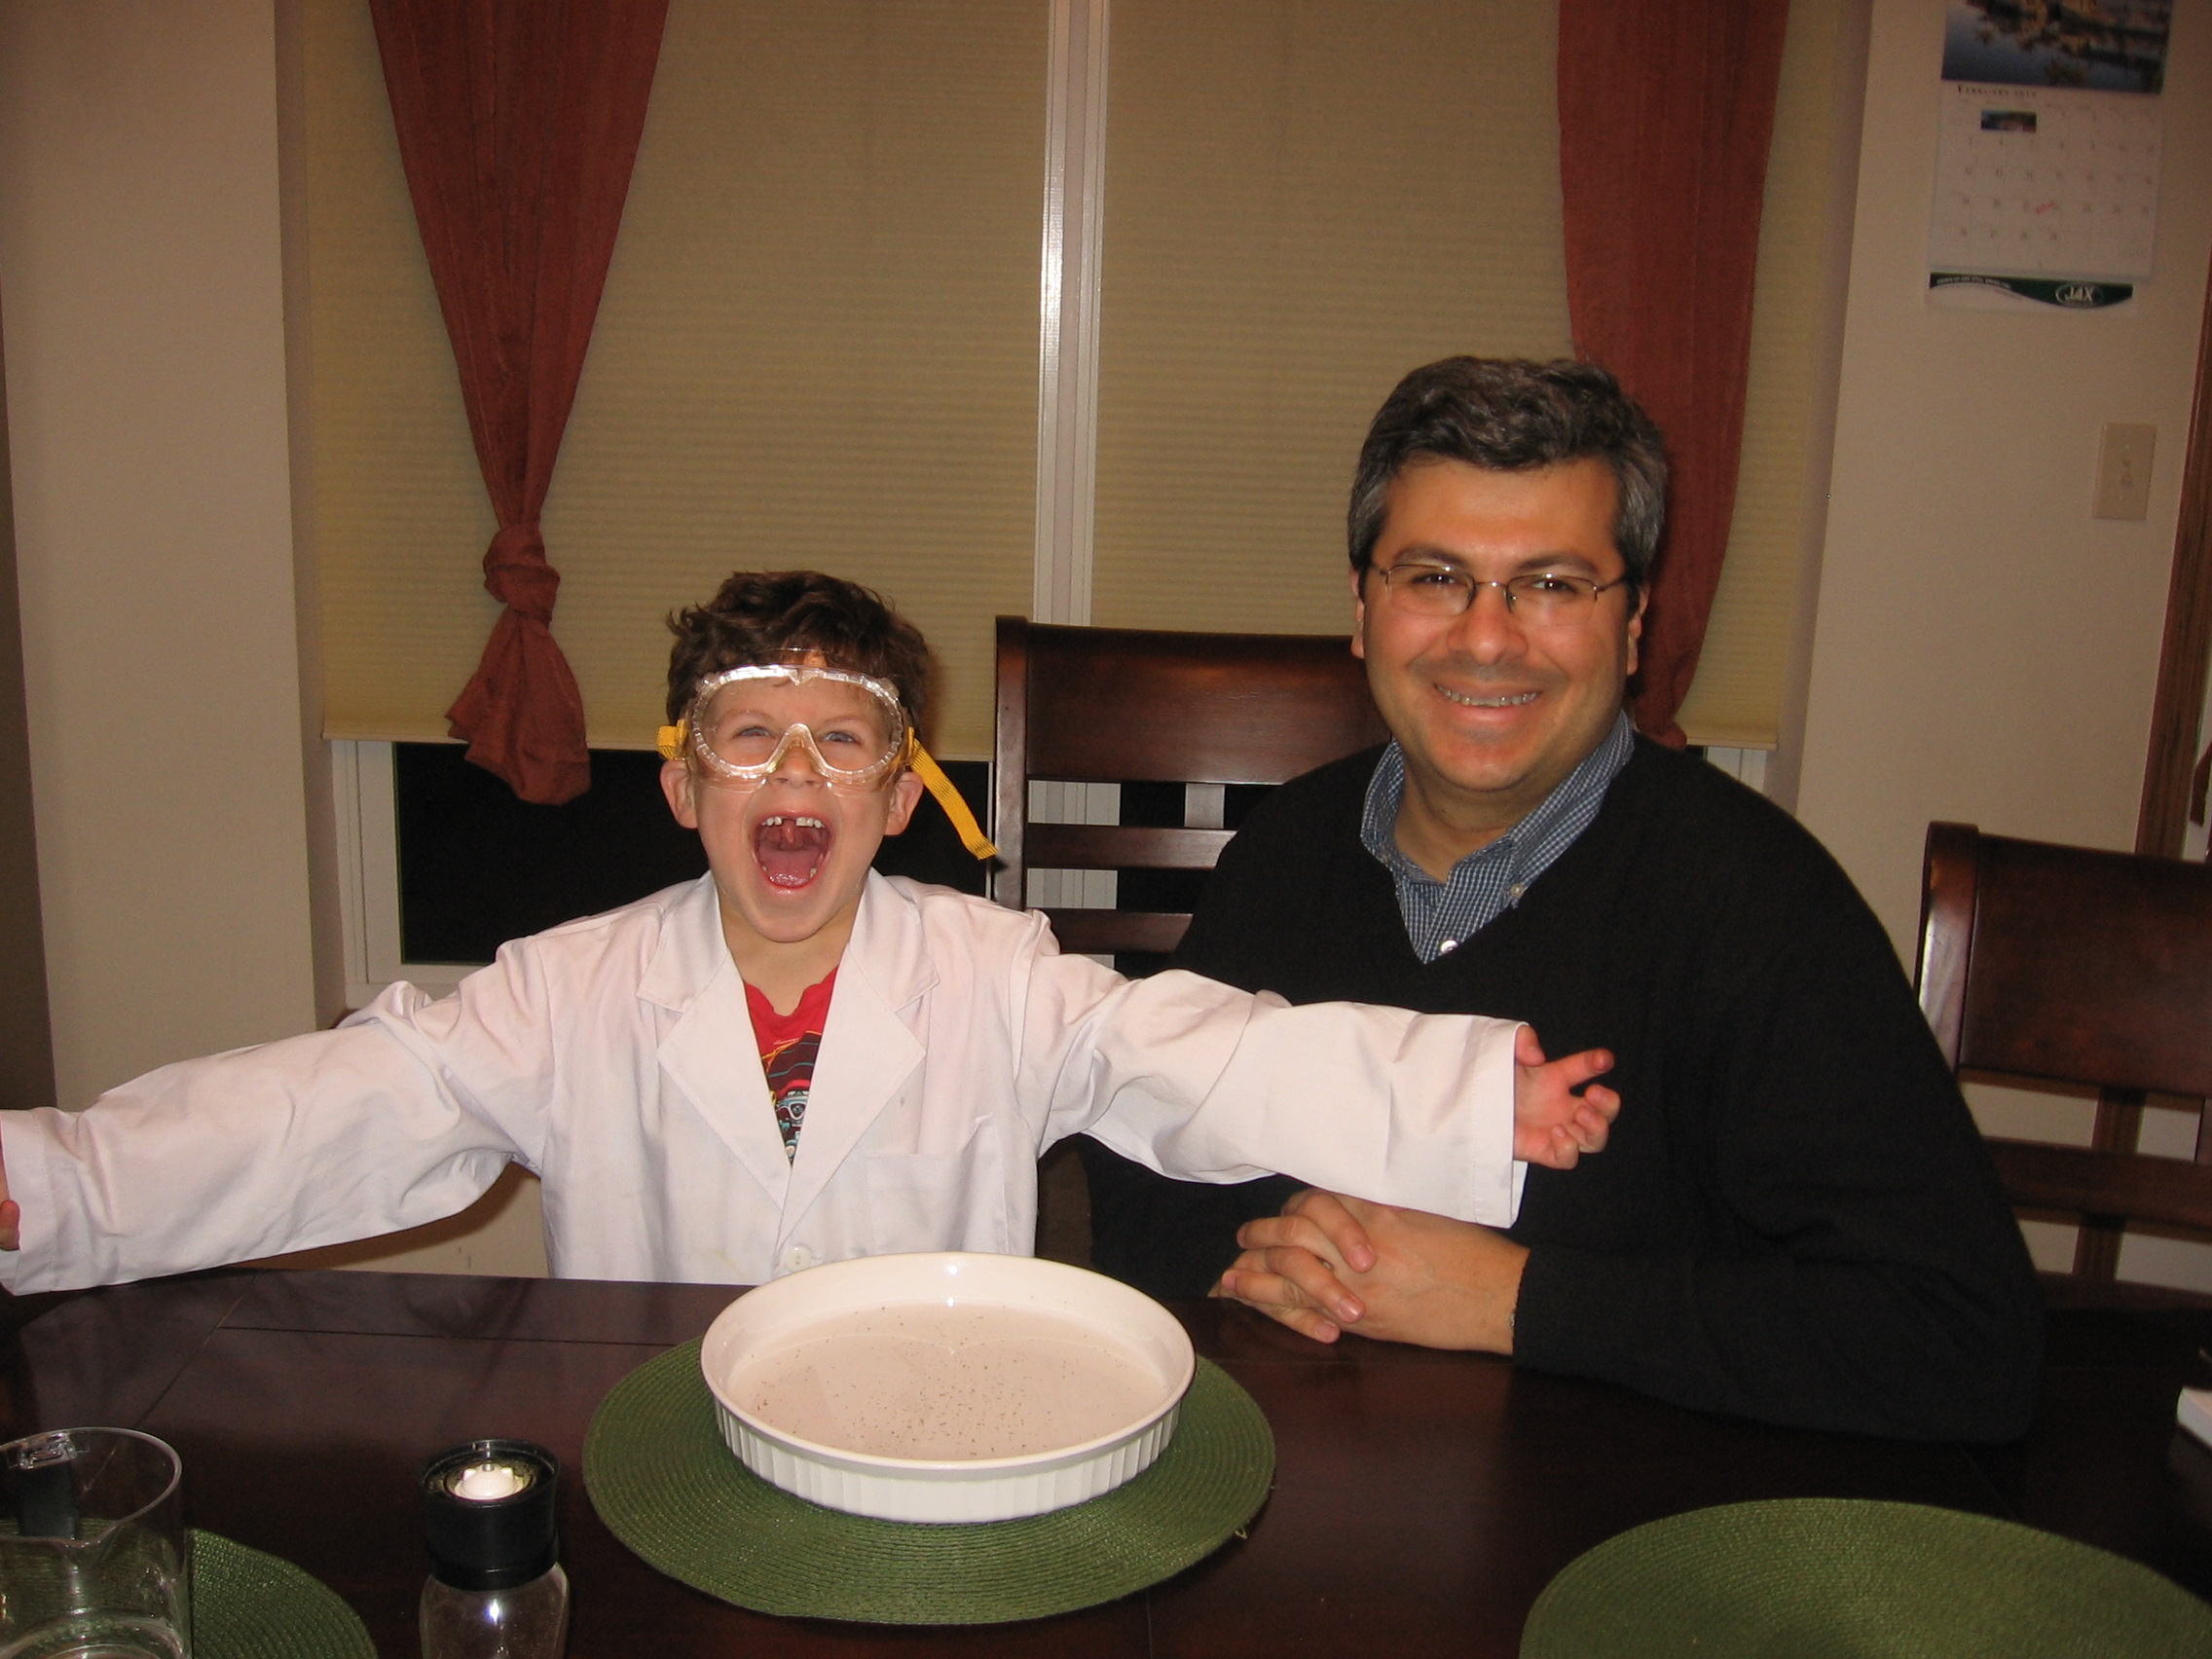 Taner Sen and his son Burak conducting science experiments in Sen’s kitchen.